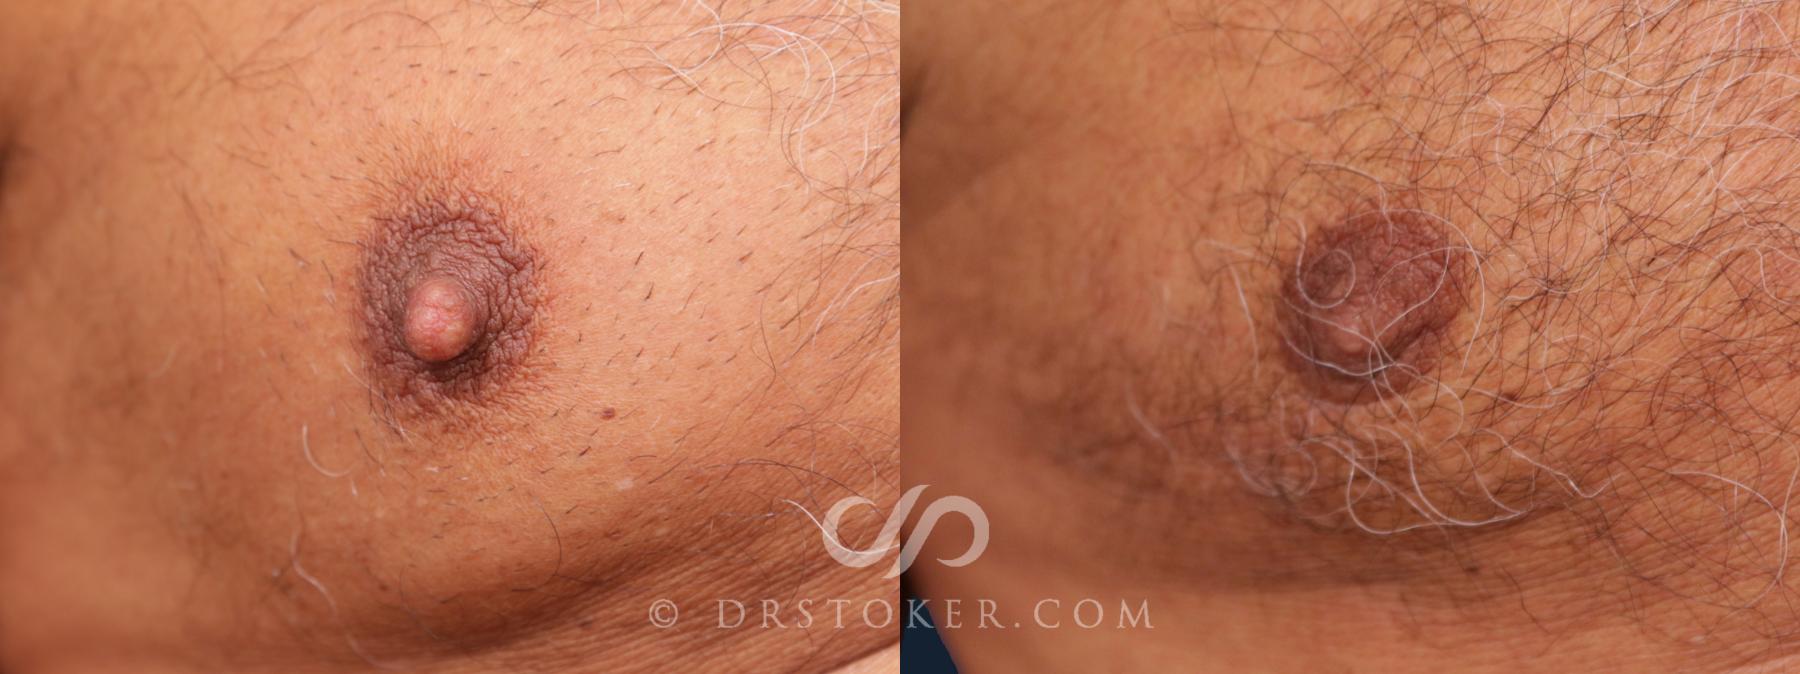 Before & After Breast Reduction for Men (Gynecomastia) Case 2024 Front View in Los Angeles, CA